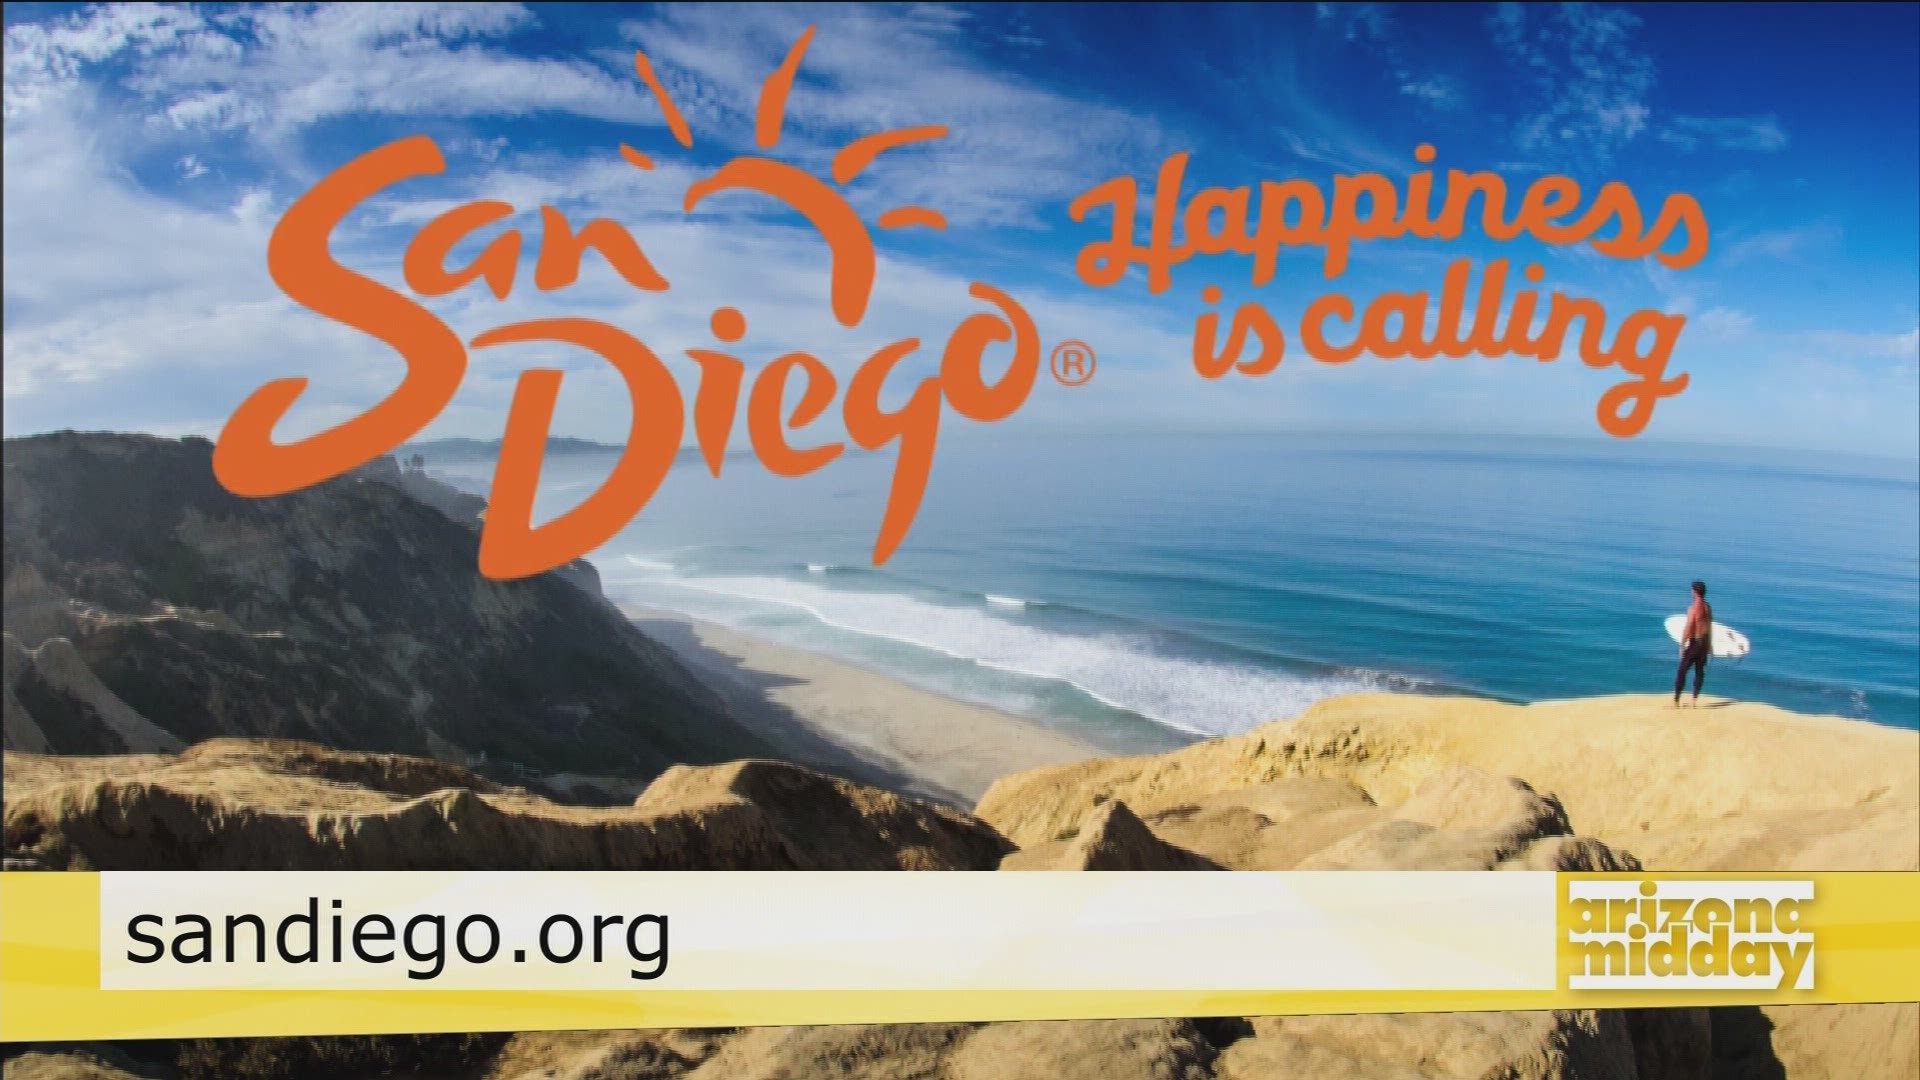 We check out the top beach fun ideas in San Diego, California perfect for your next Family Vacation